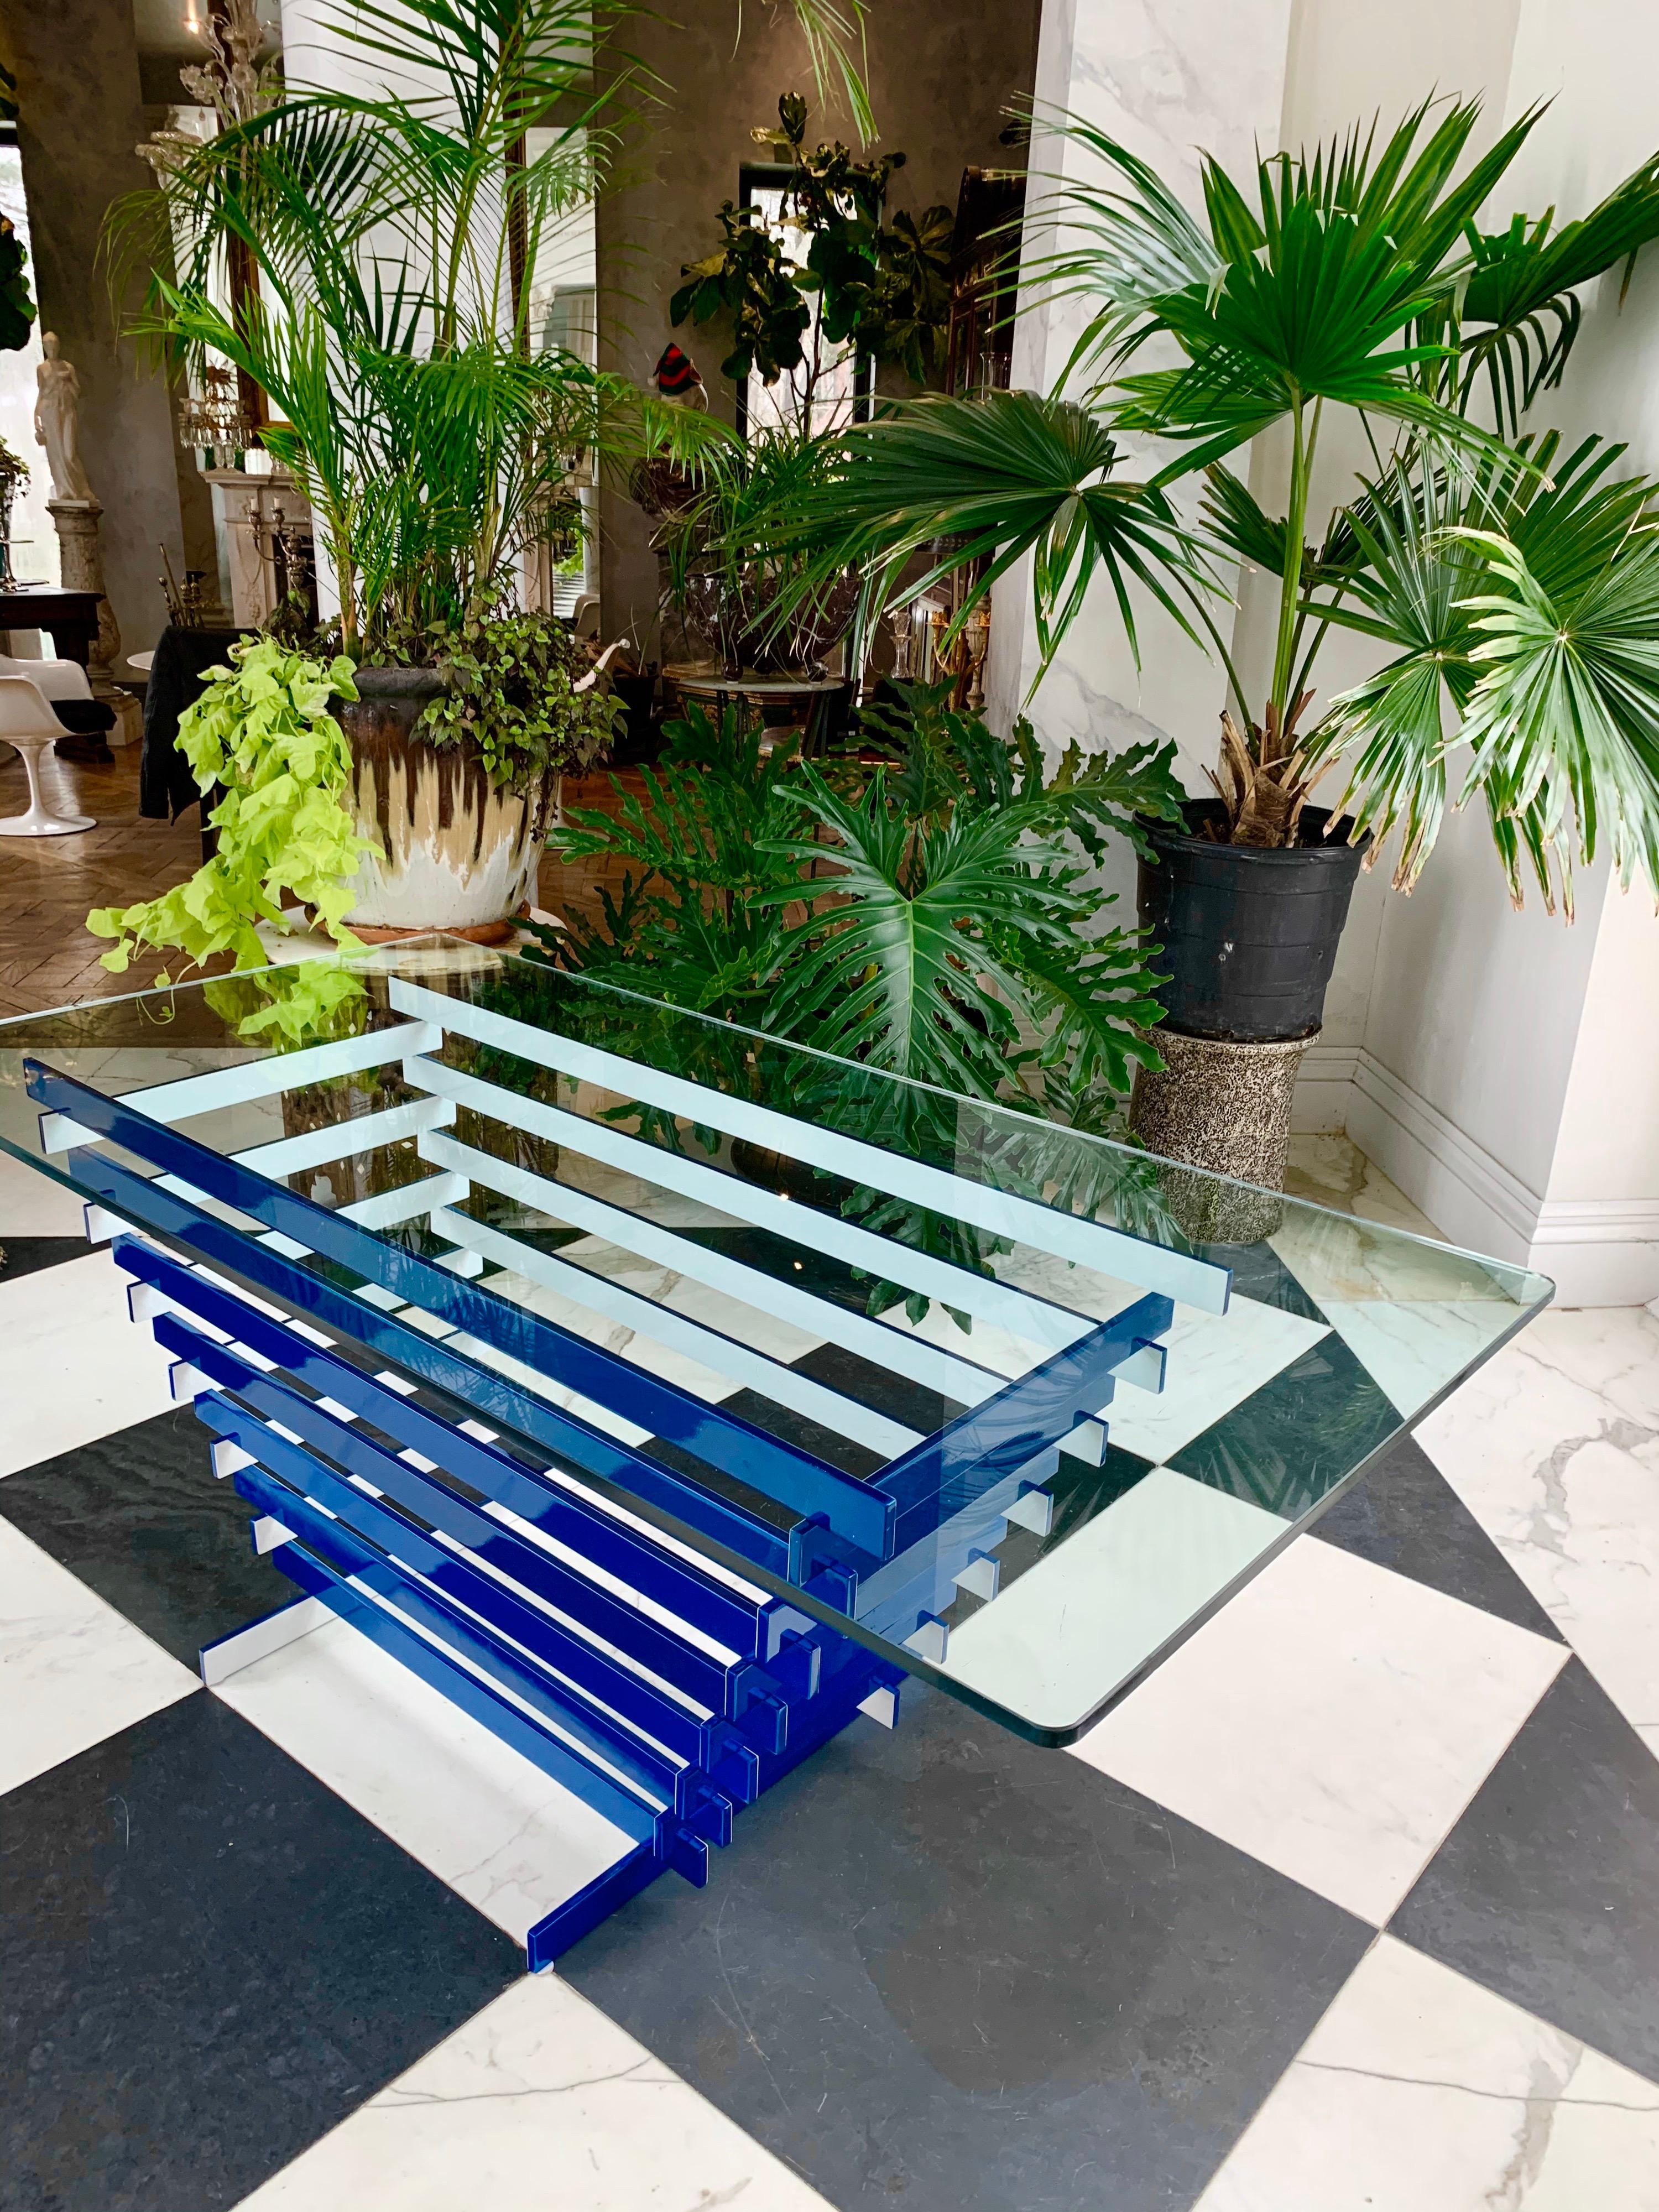 This steel base serving table could also be used as a bar or dining table. It is attributed to Paul Mayen.
It is professionally painted in metallic blue and white.
